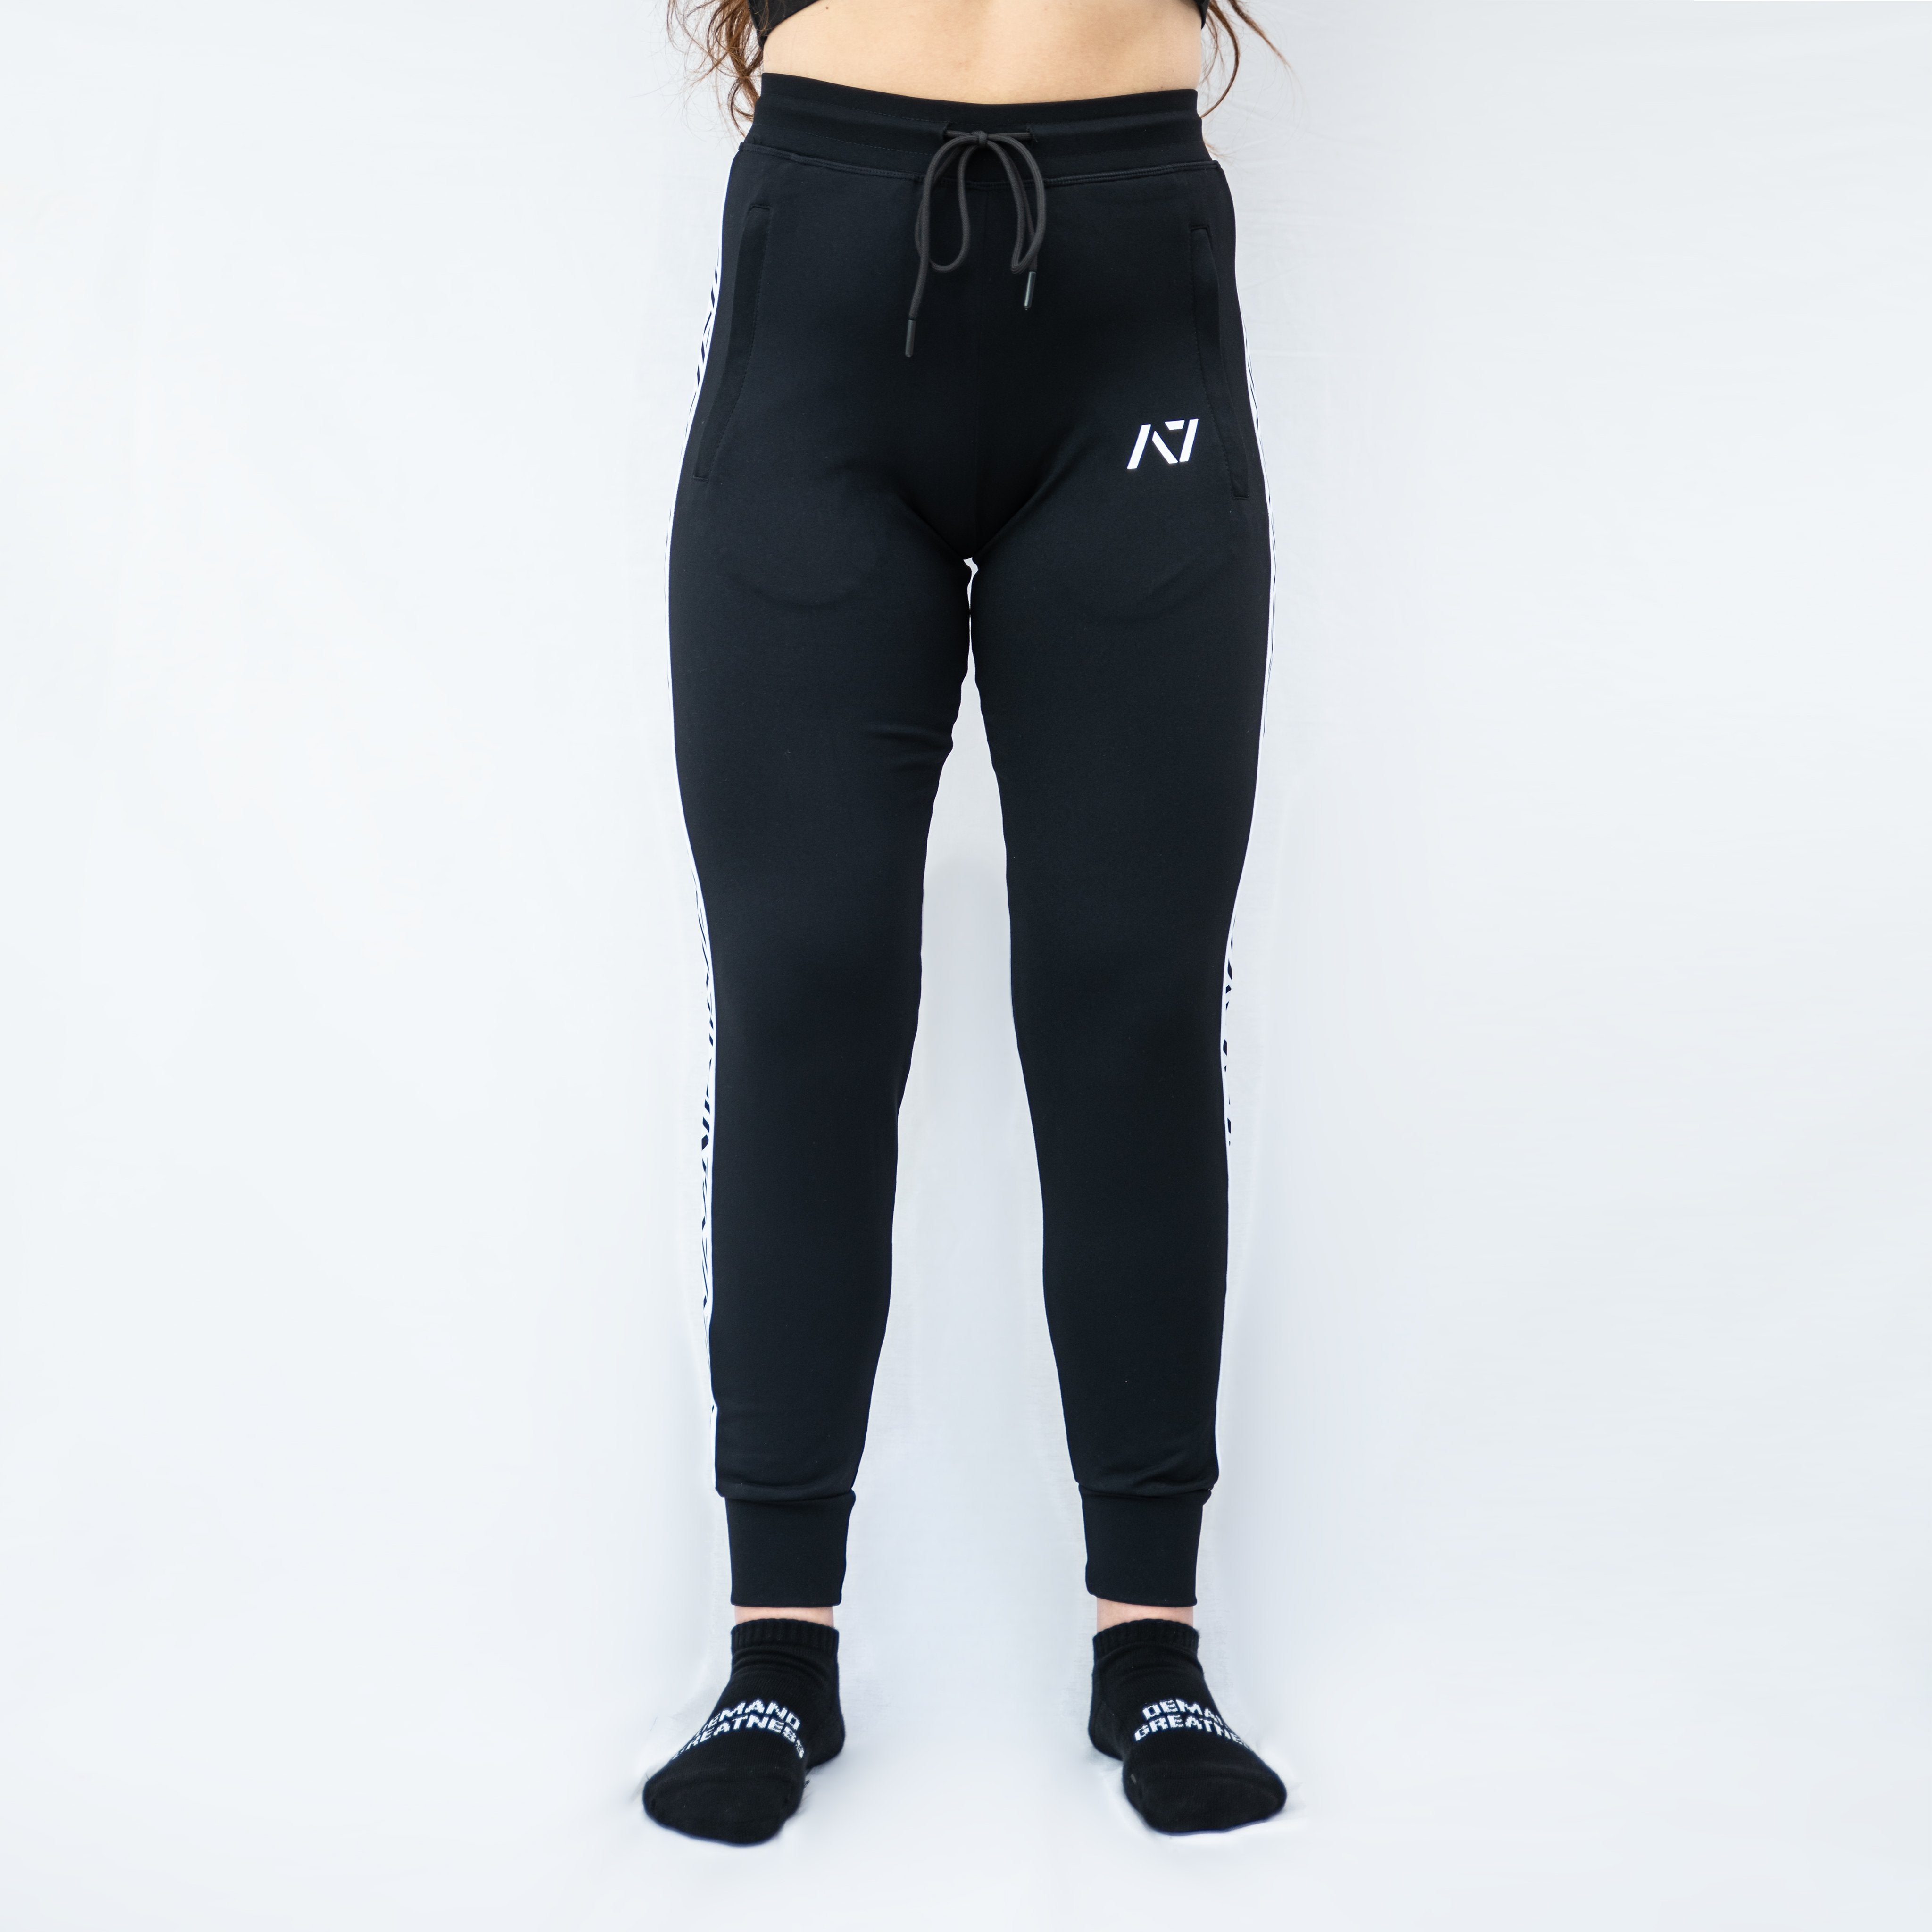 Defy joggers are just as comfortable in the gym as they are going out. These are made with premium moisture-wicking 4-way-stretch material for greater range of motion.  These are a great fit for both men and women.